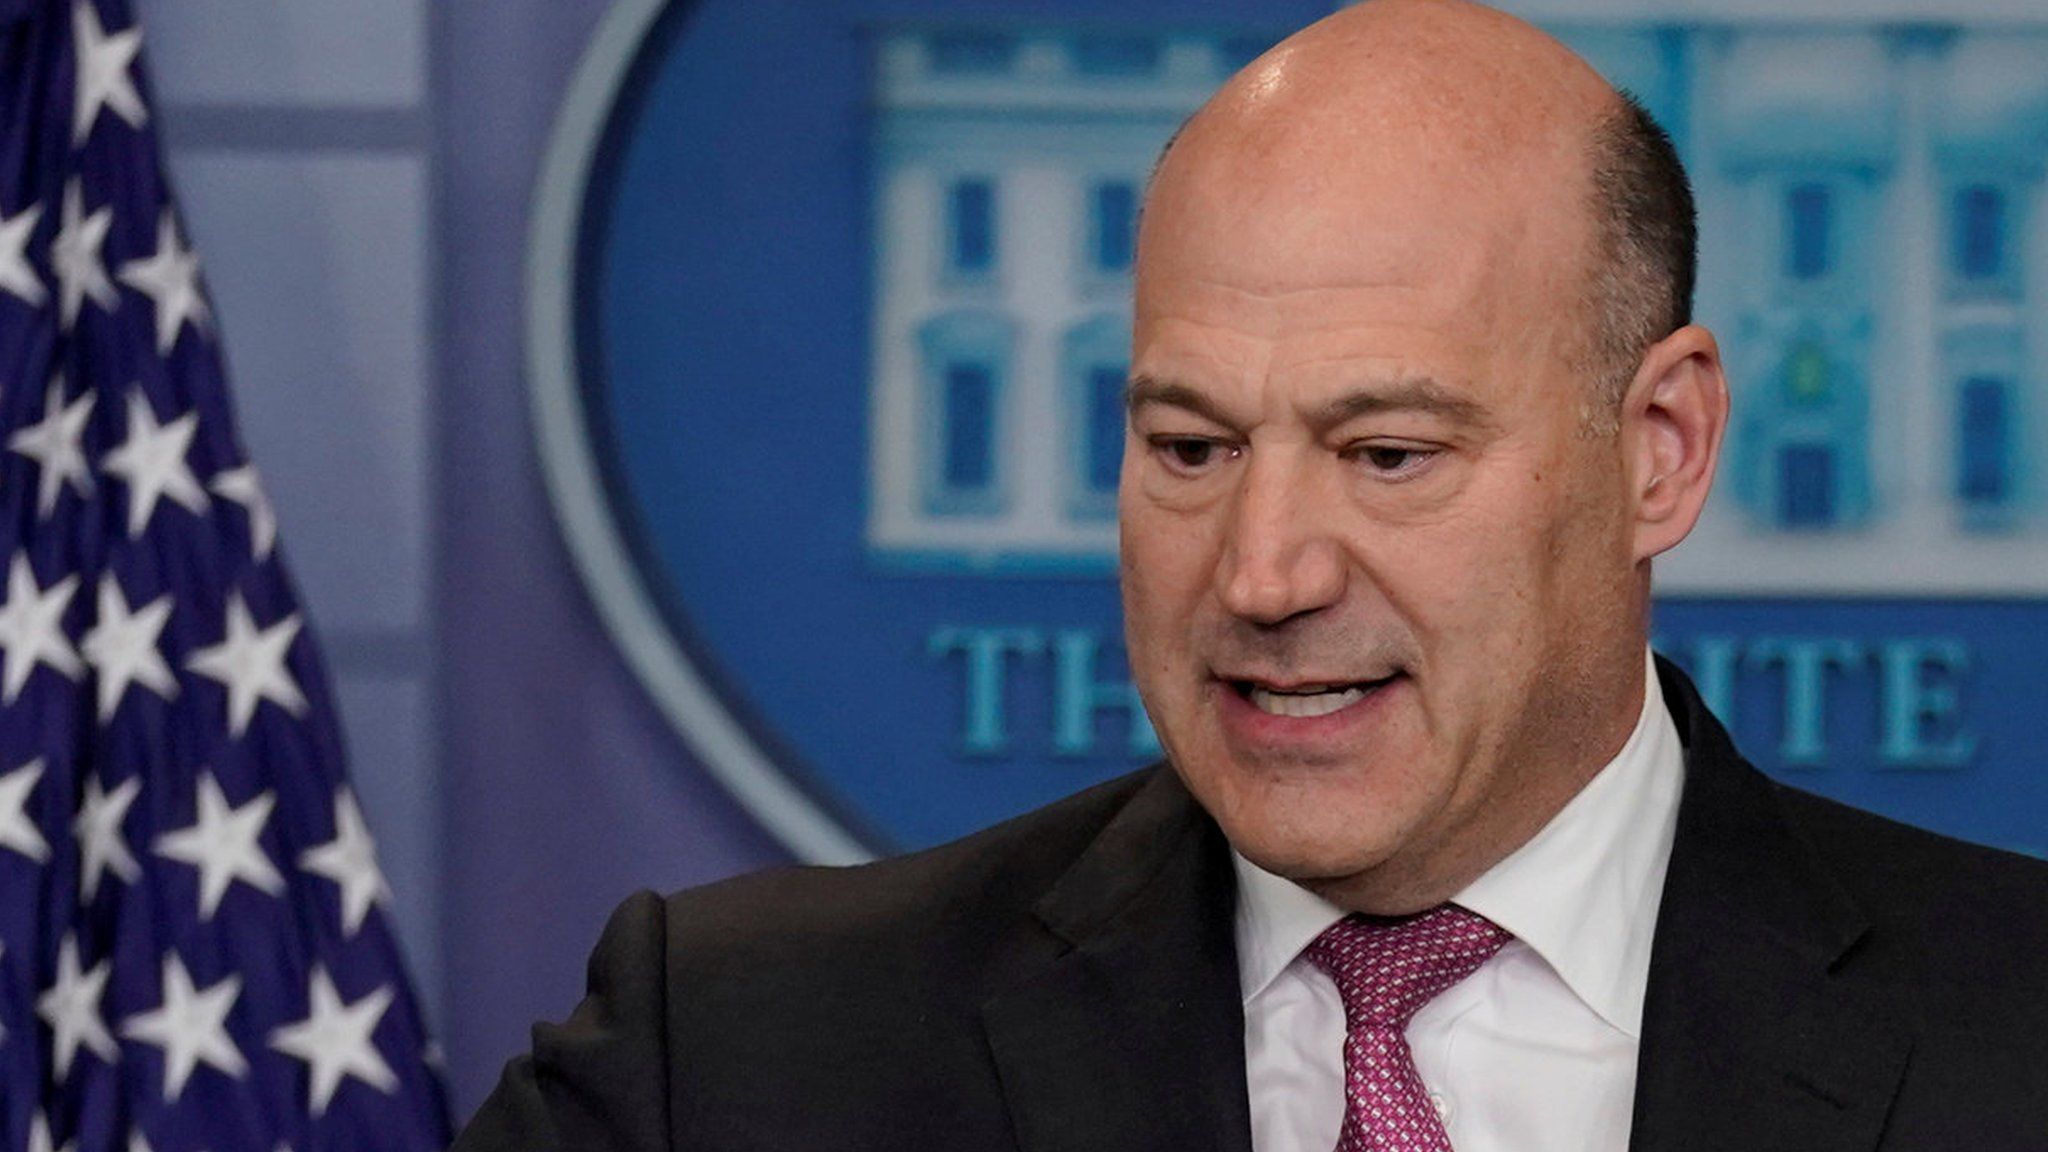 Director of the National Economic Council, Gary Cohn, speaks during a White House news conference on January 23, 2018